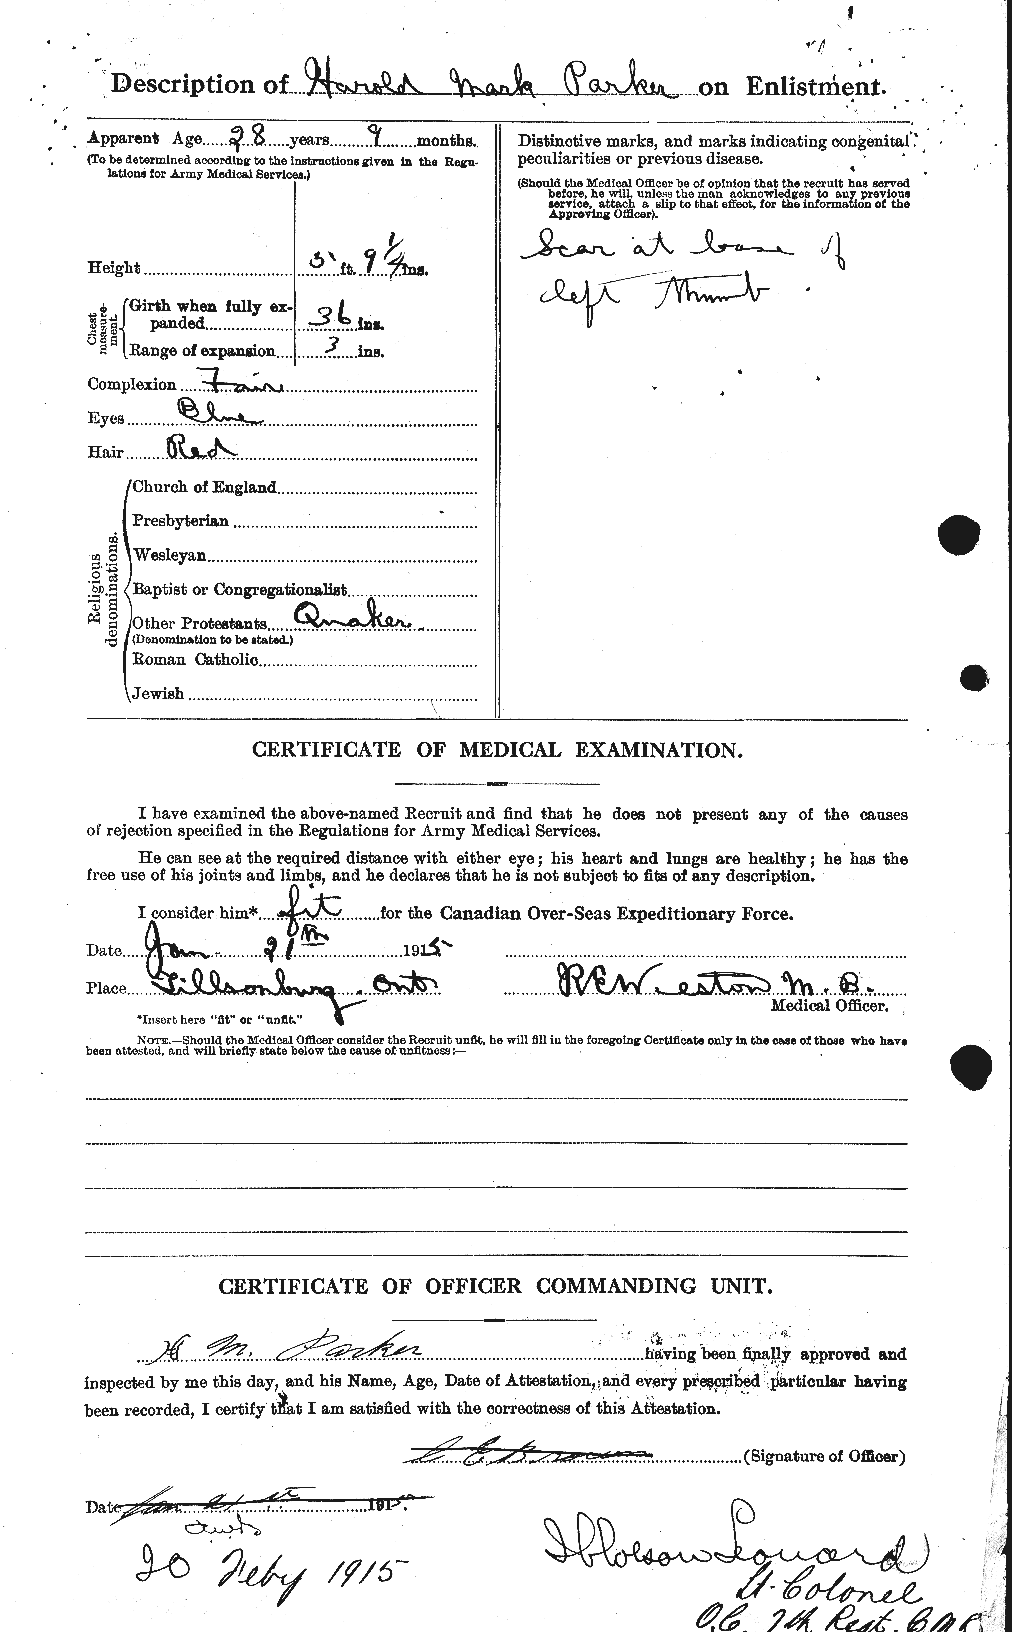 Personnel Records of the First World War - CEF 565309b